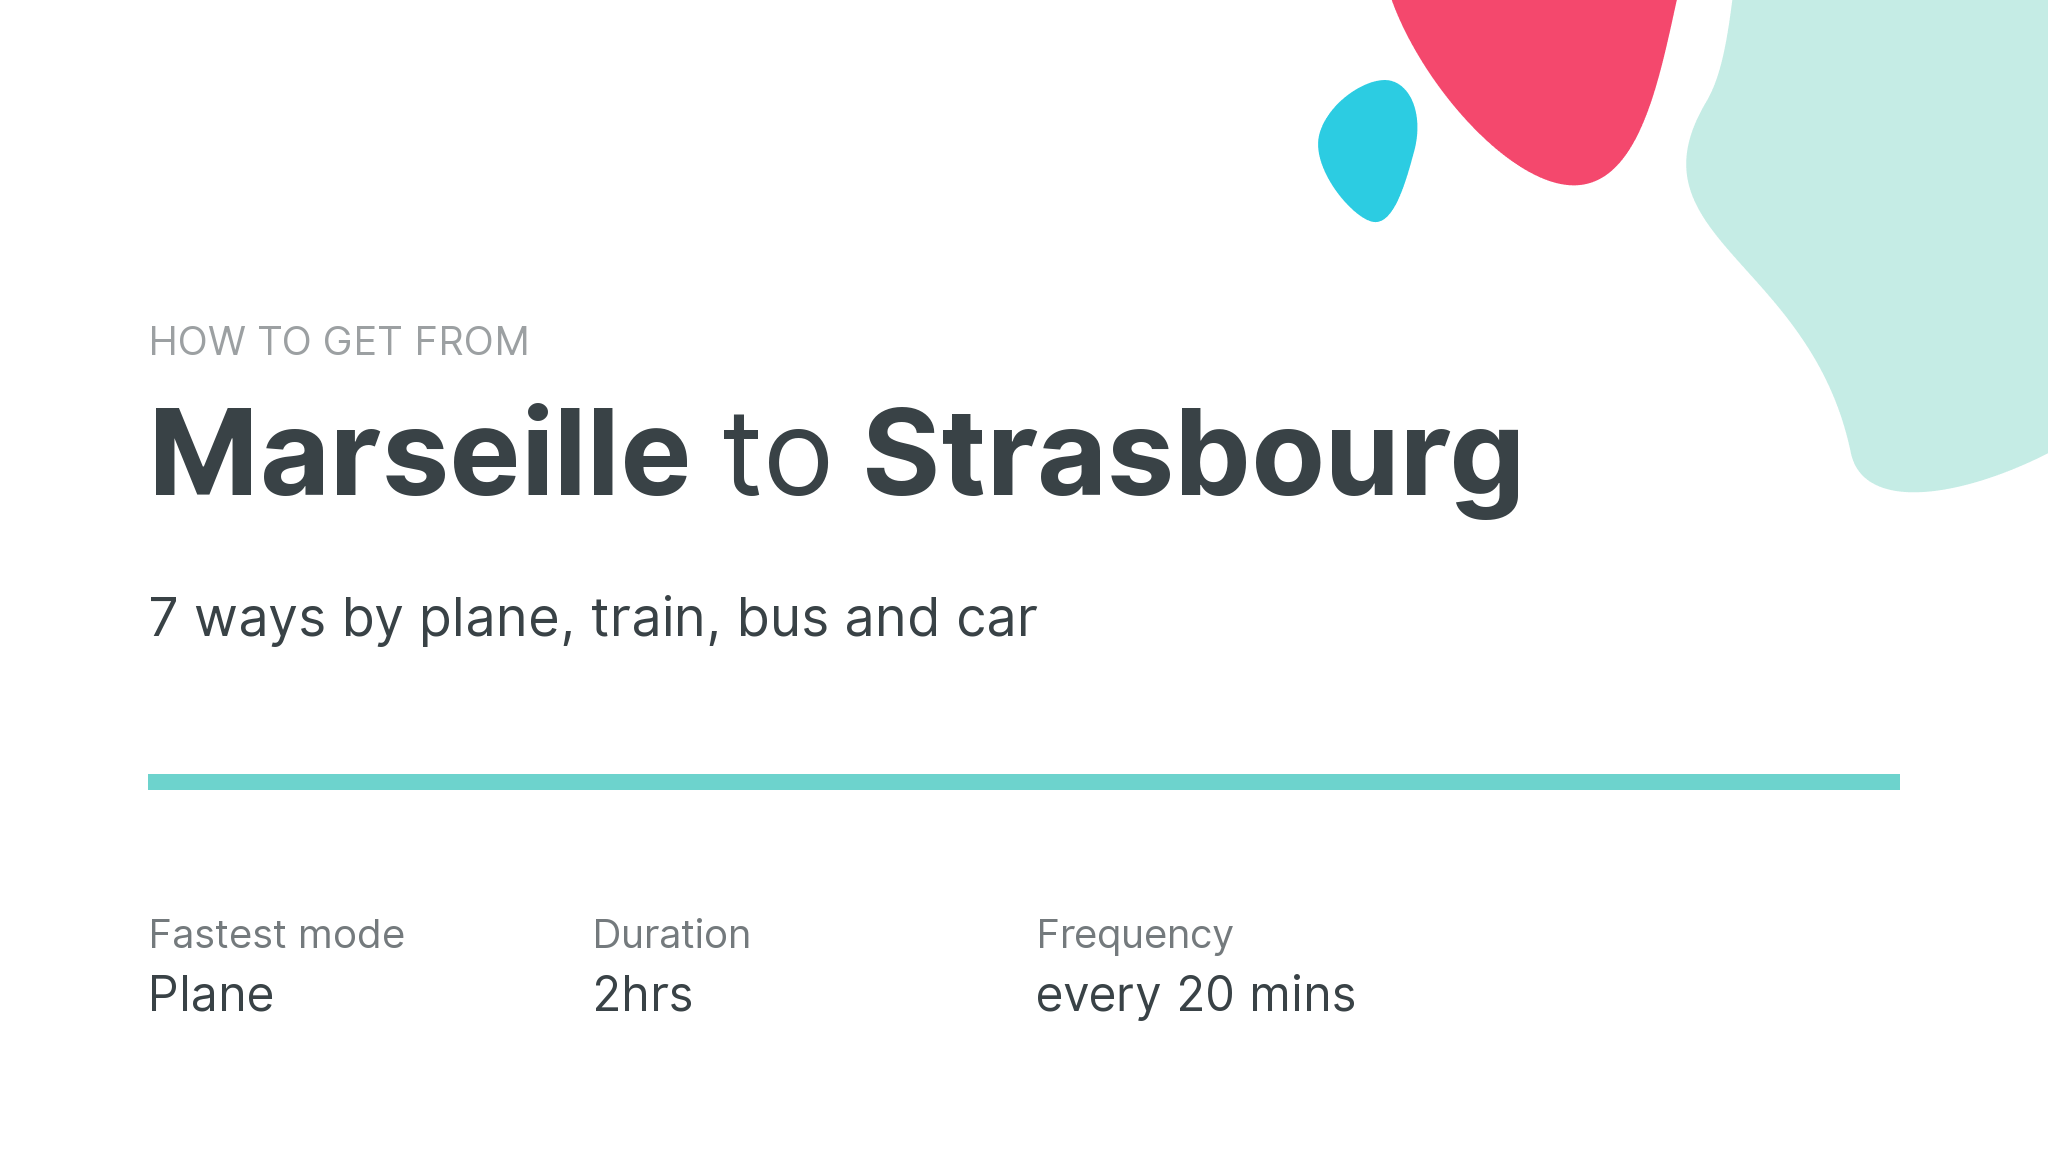 How do I get from Marseille to Strasbourg